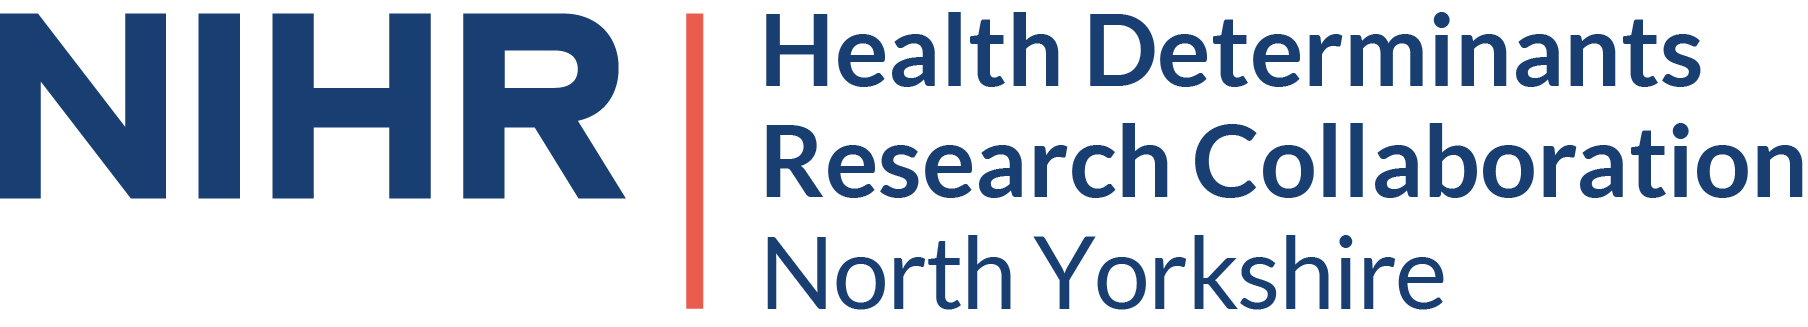 Health Determinants Research Collaboration North Yorkshire logo